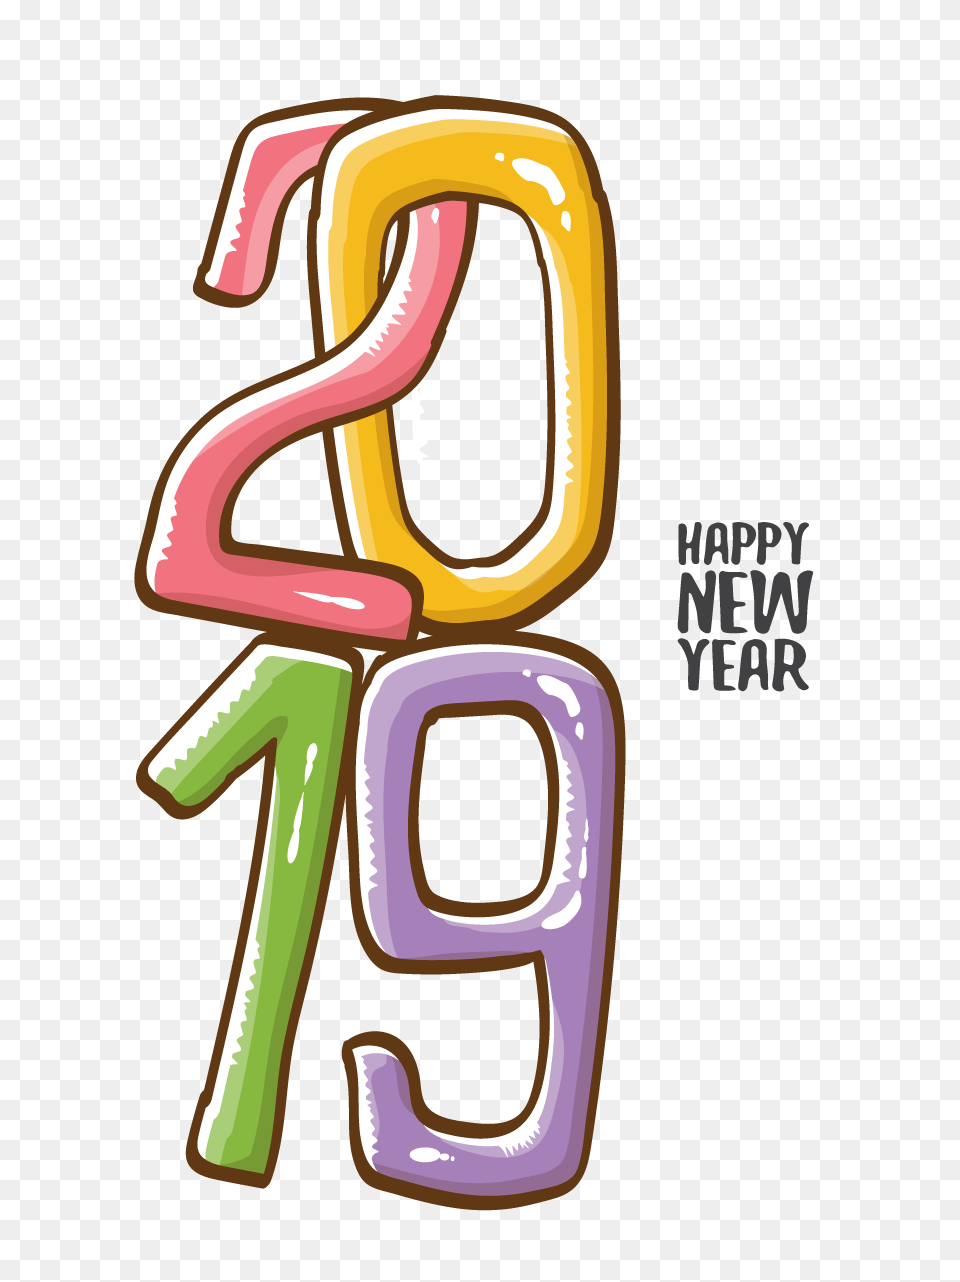 Happy New Year Vector Free Vector Graphic Download, Light, Text, Symbol, Number Png Image